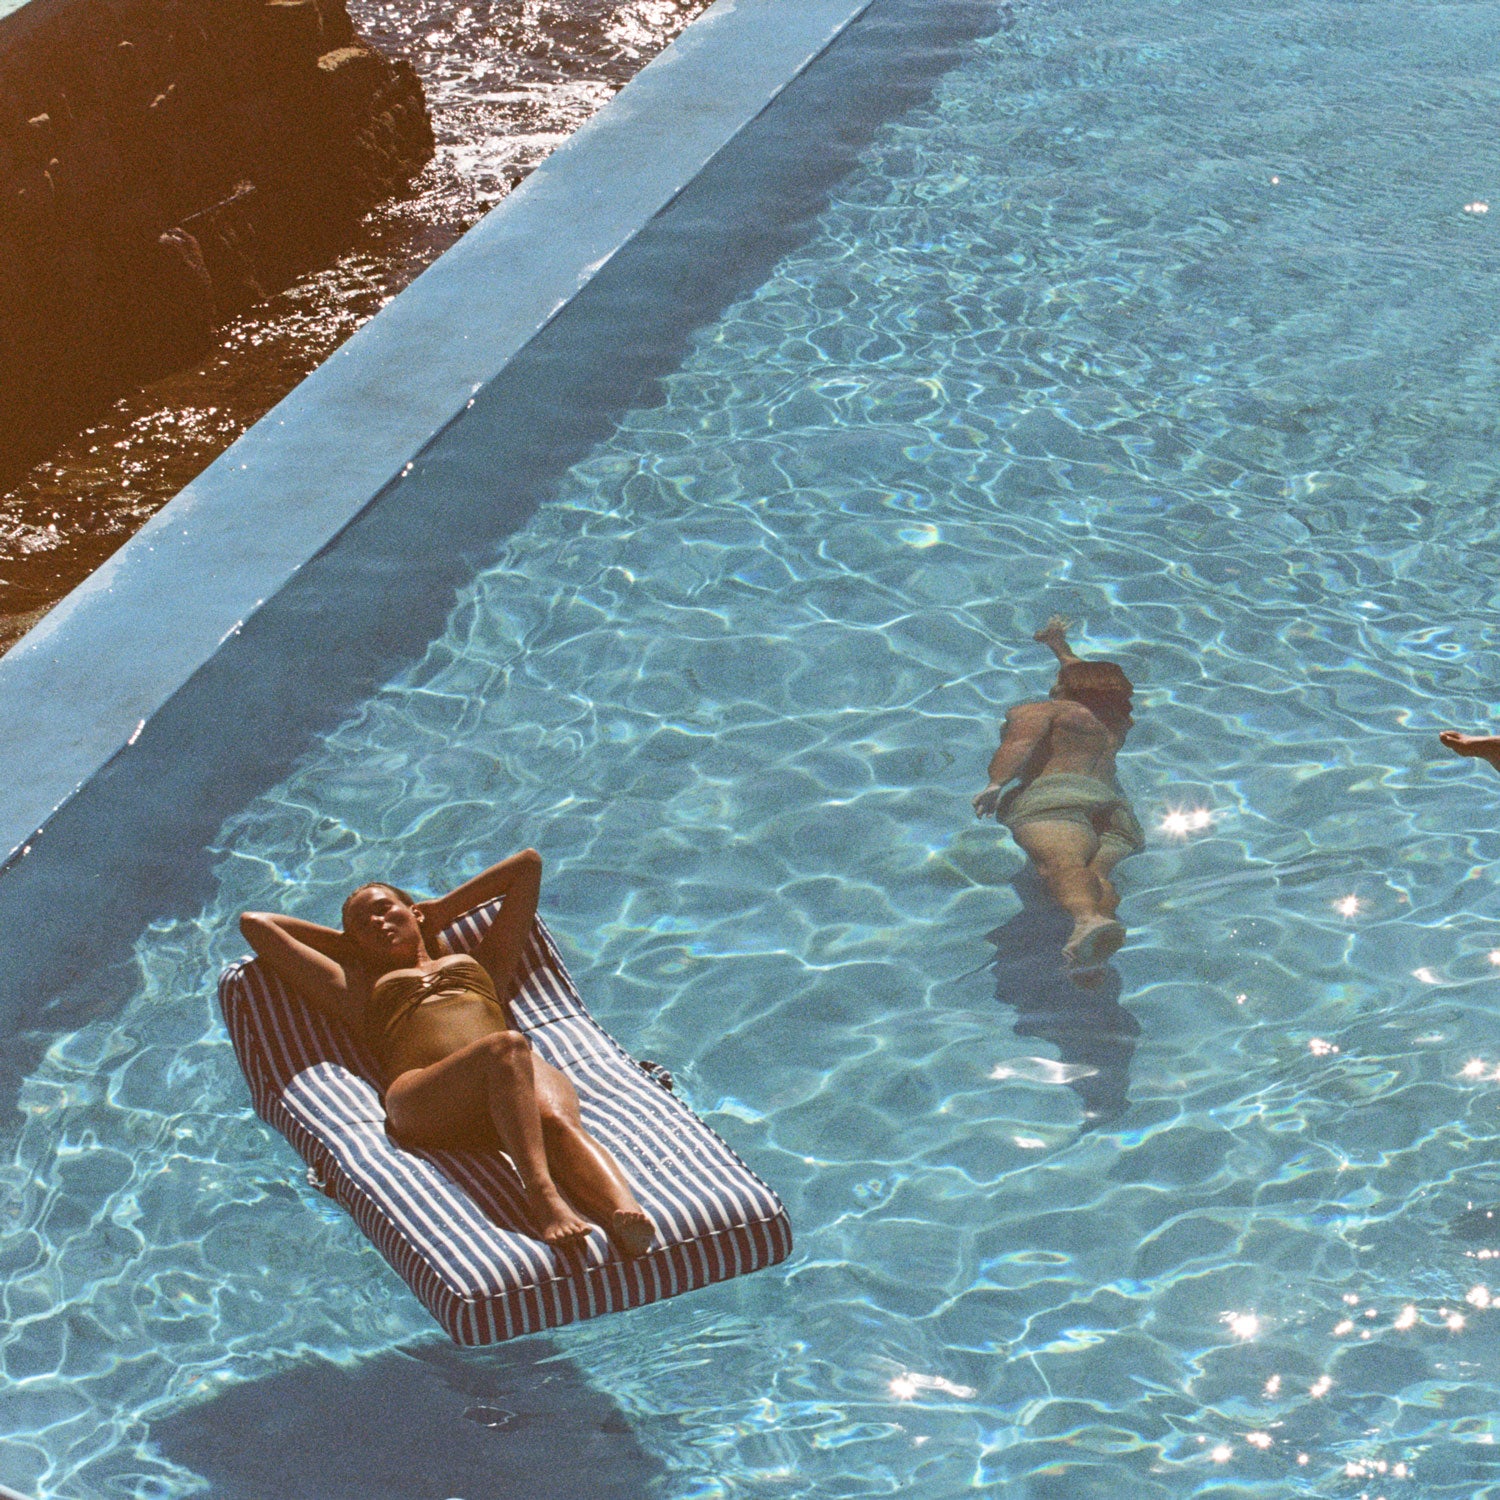 A women on a blue and white pool float lounger for adults floating in a swimming pool with rock in the background and a man swimming underwater.